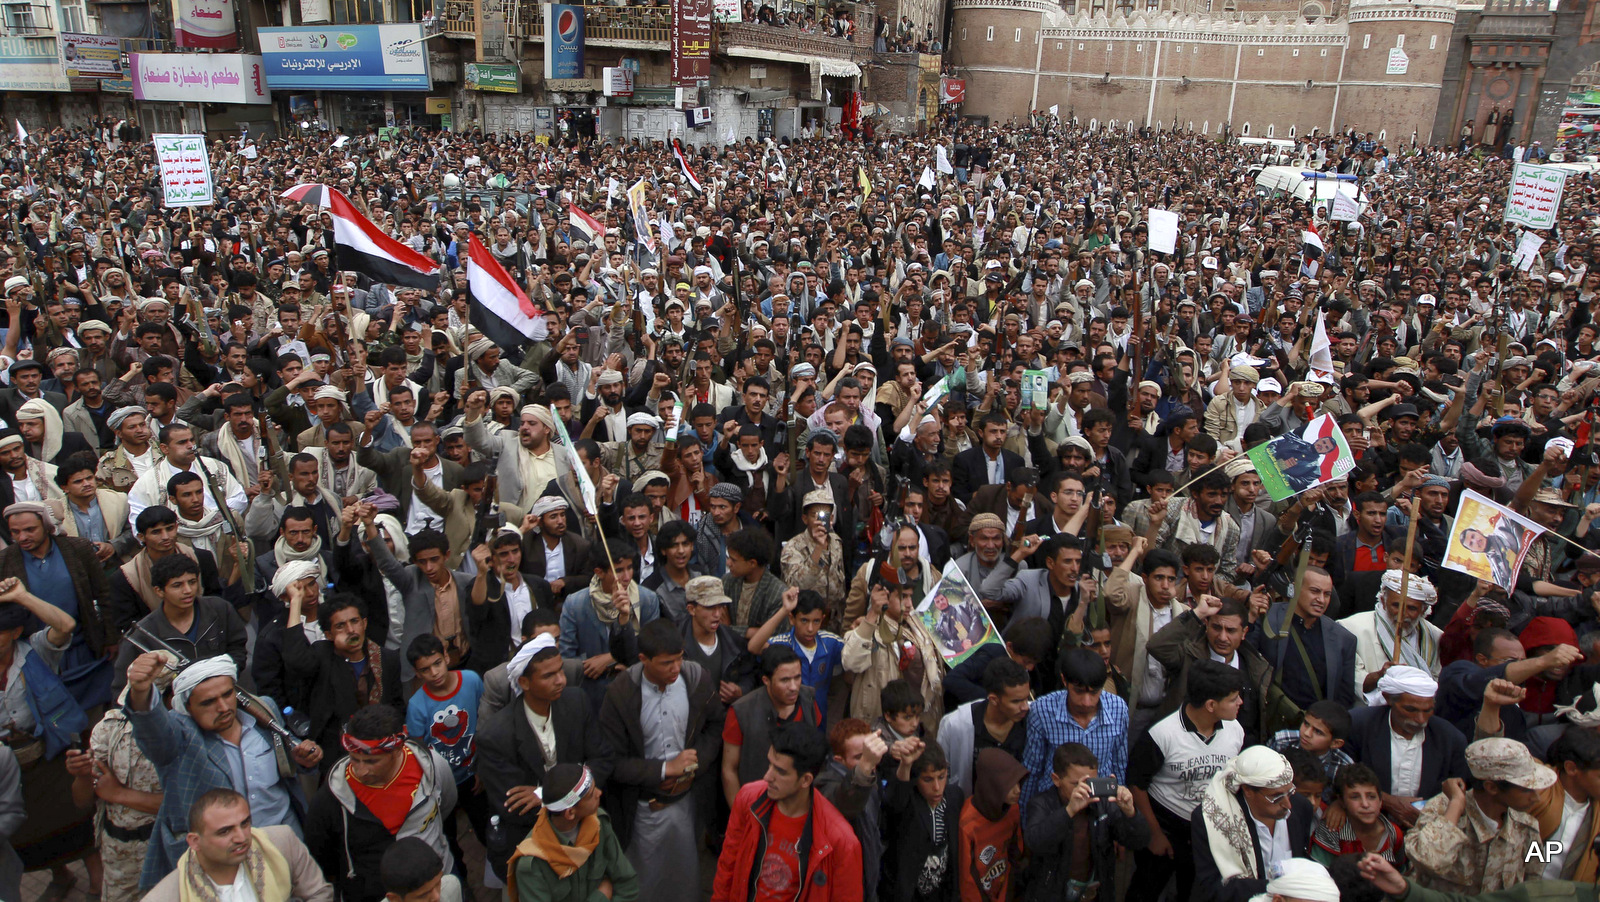 Yemenis gather to protest against Saudi-led airstrikes, during a rally in Sanaa, Yemen, Thursday, March 26, 2015.